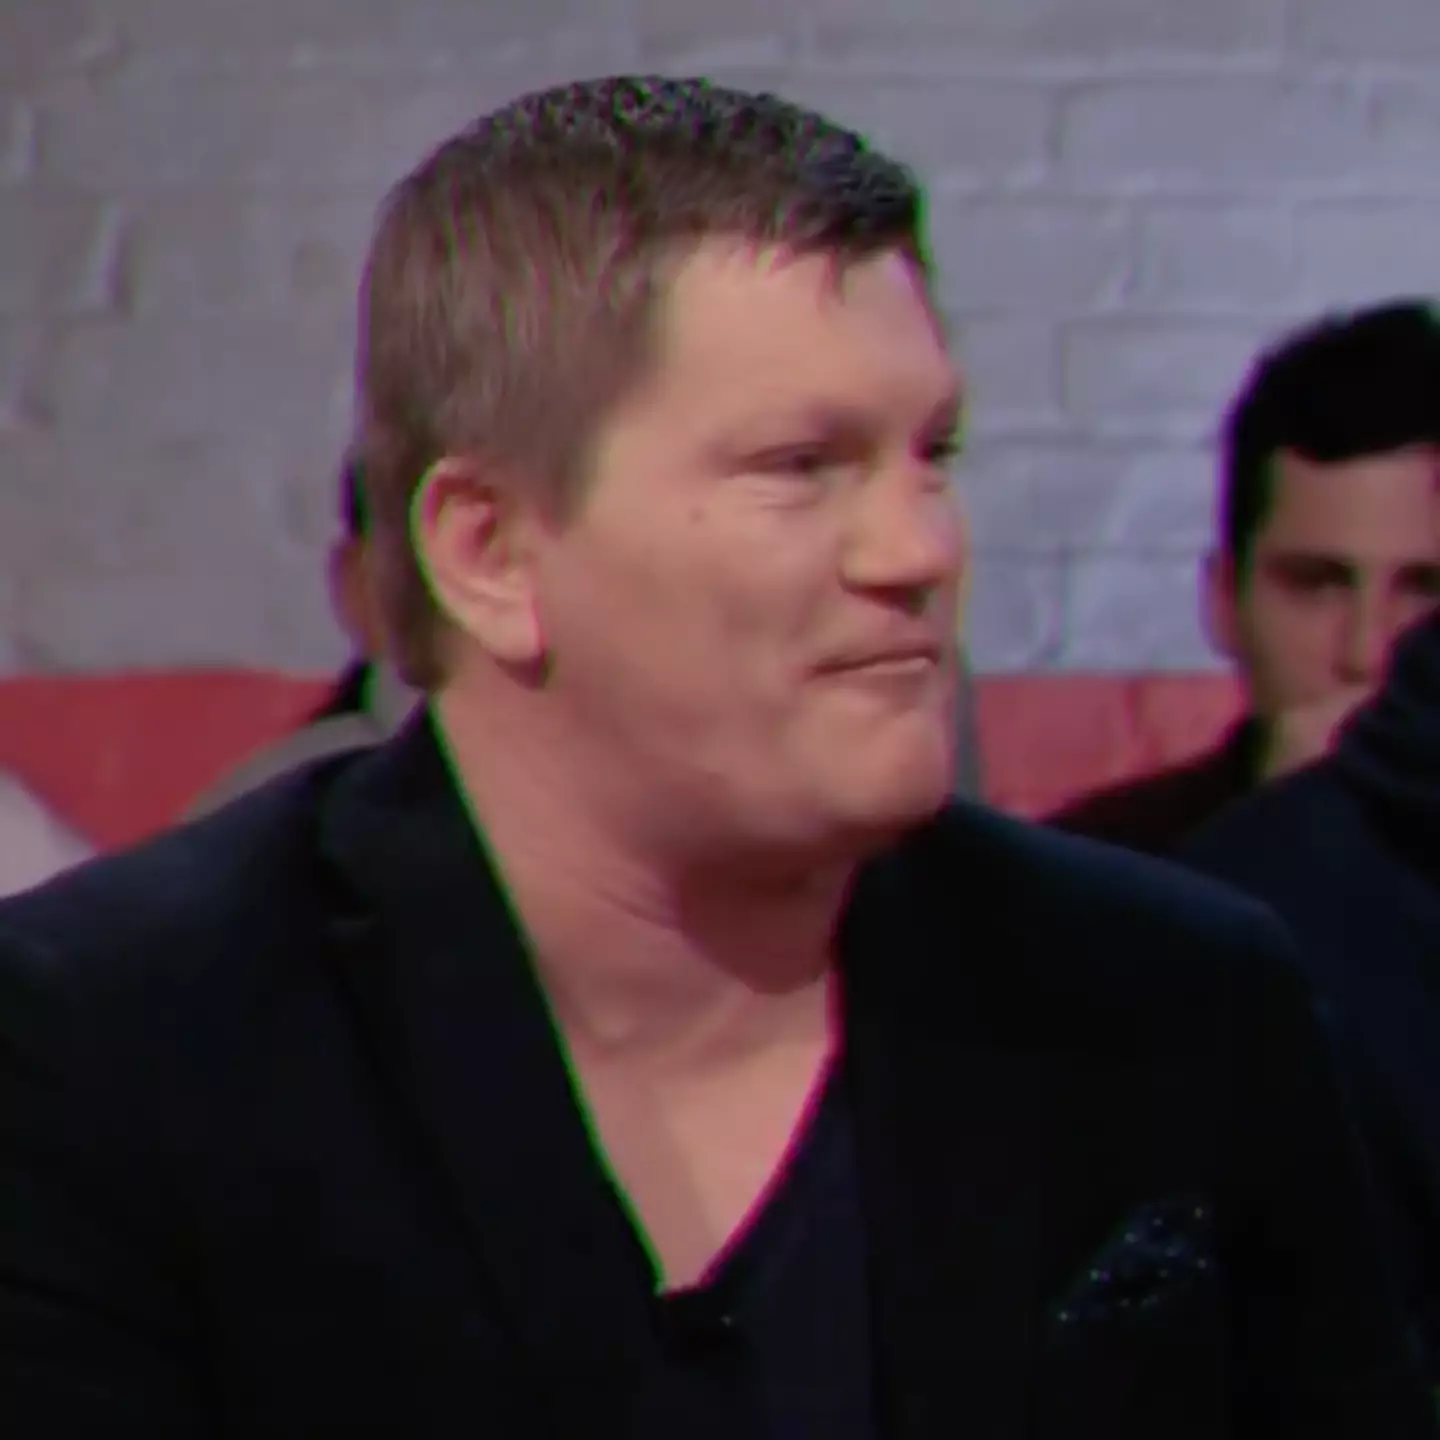 Ricky Hatton appeared on Sky Sports to tell the story.